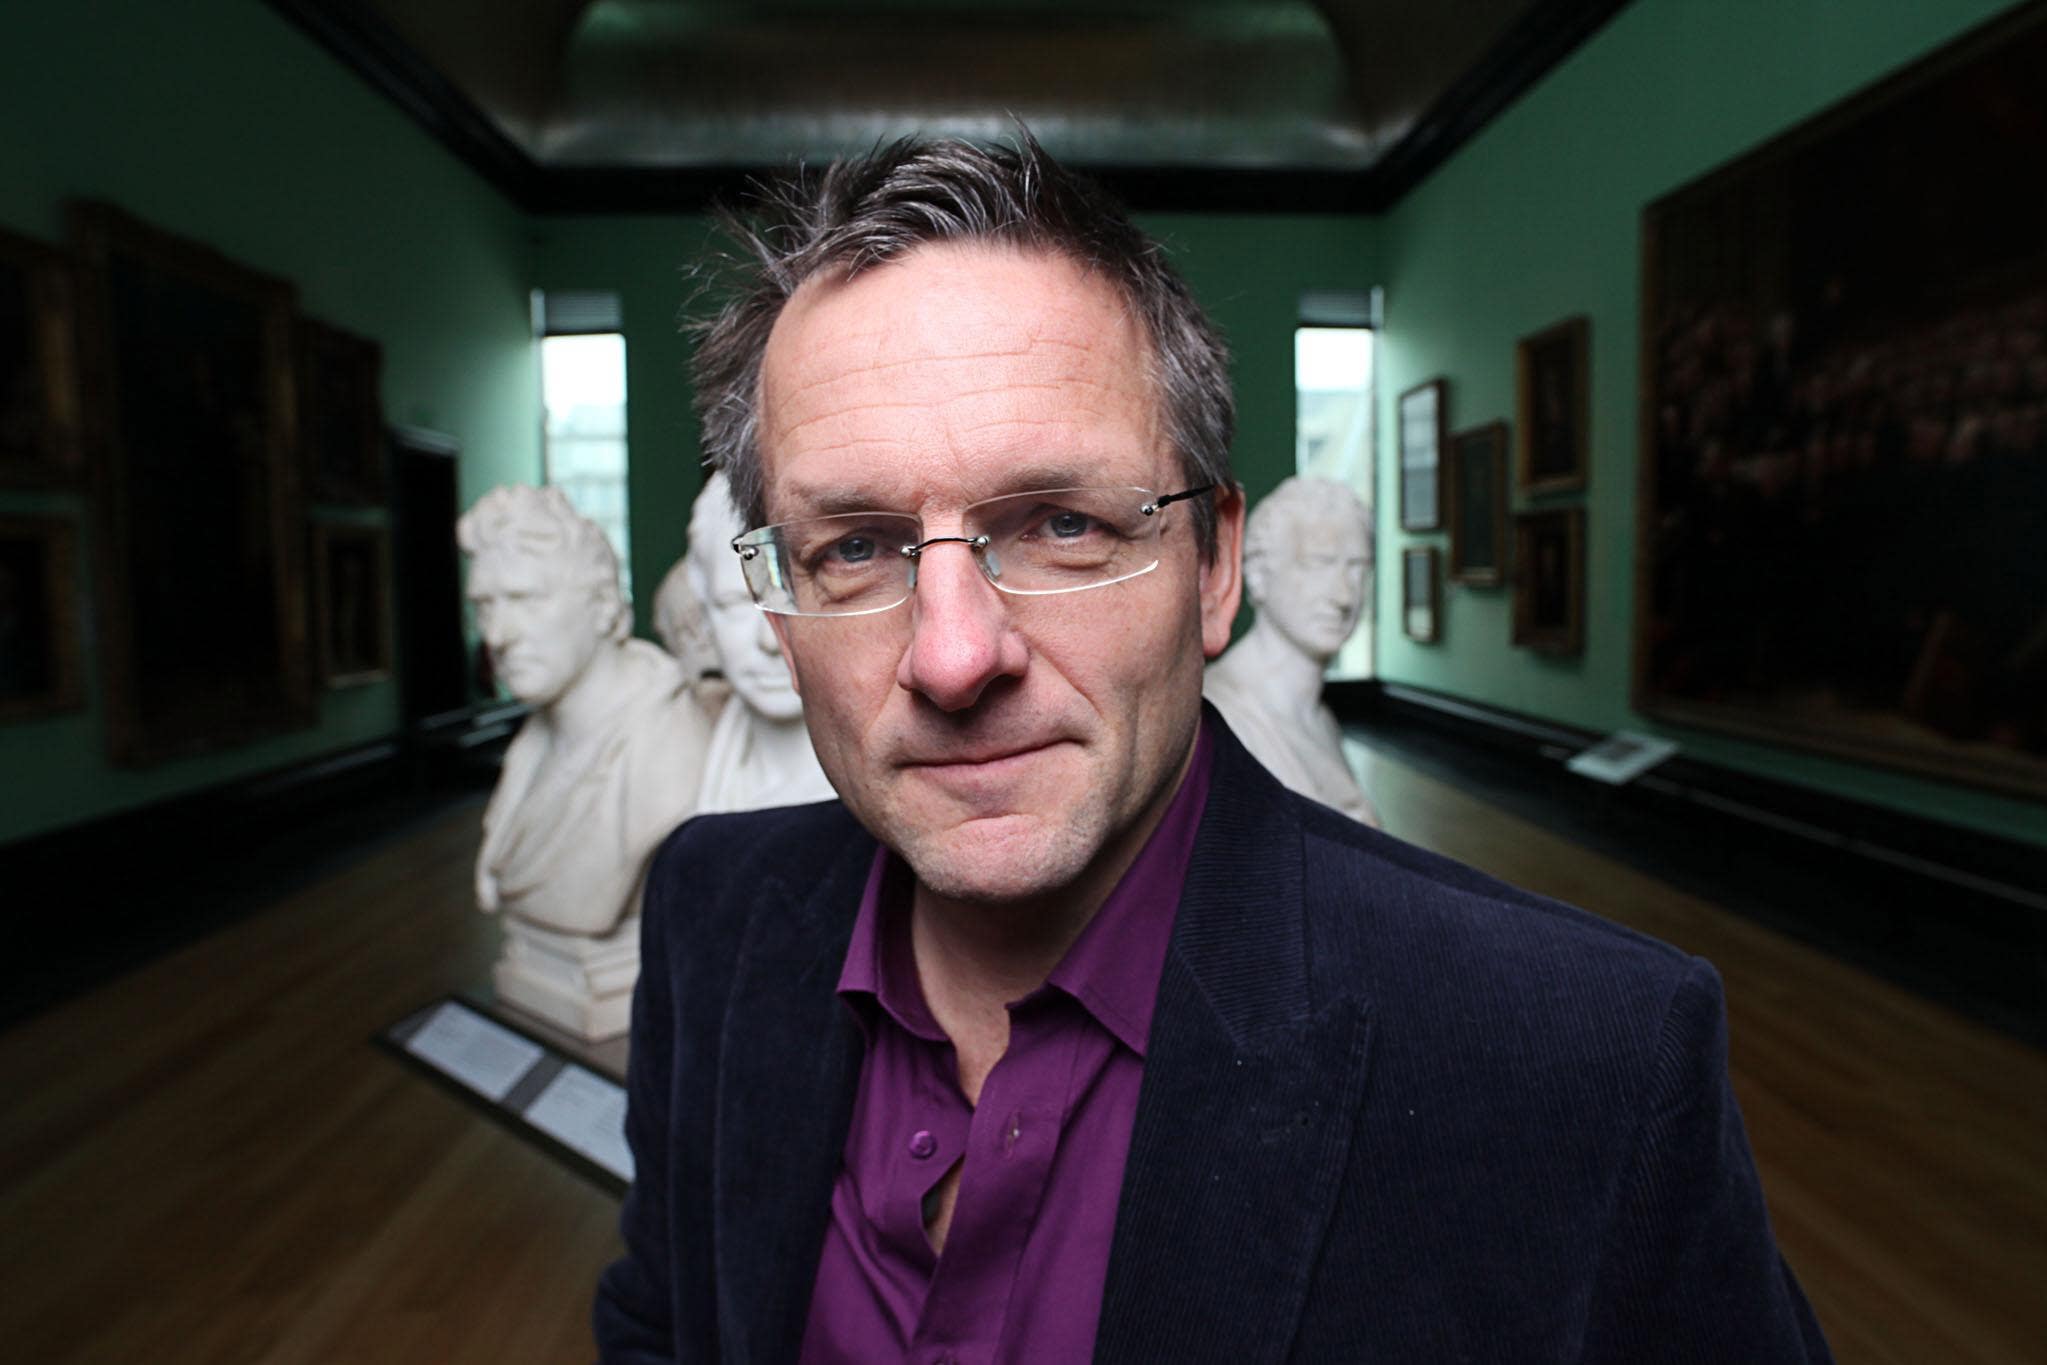 Michael Mosley’s co-presenter on Trust Me, I’m A Doctor described him as a ‘national treasure’ (BBC/PA)